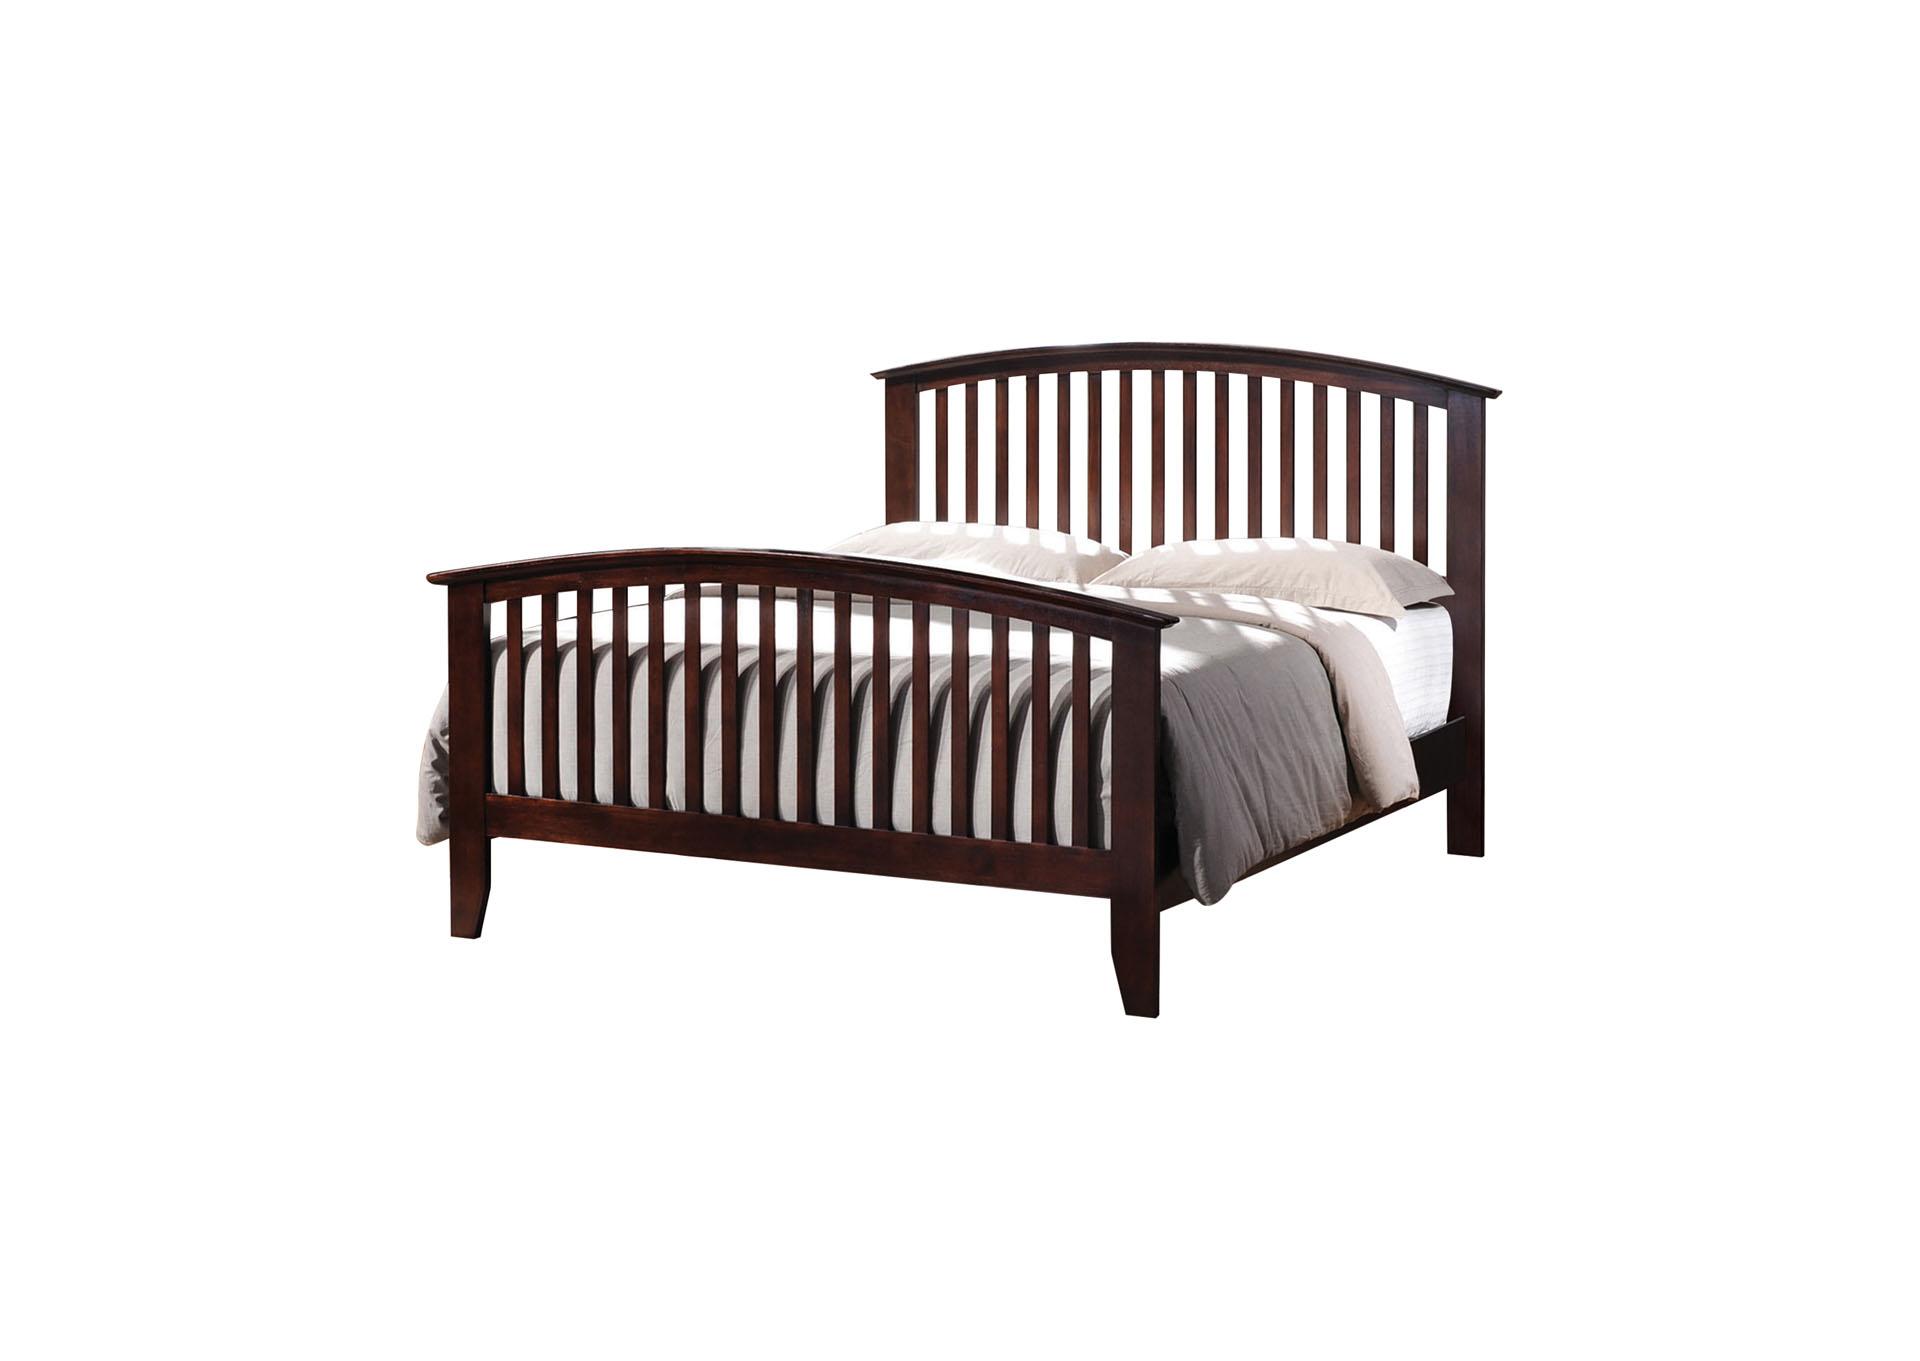 Cappuccino Tia Cappuccino King Bed,InStore Products